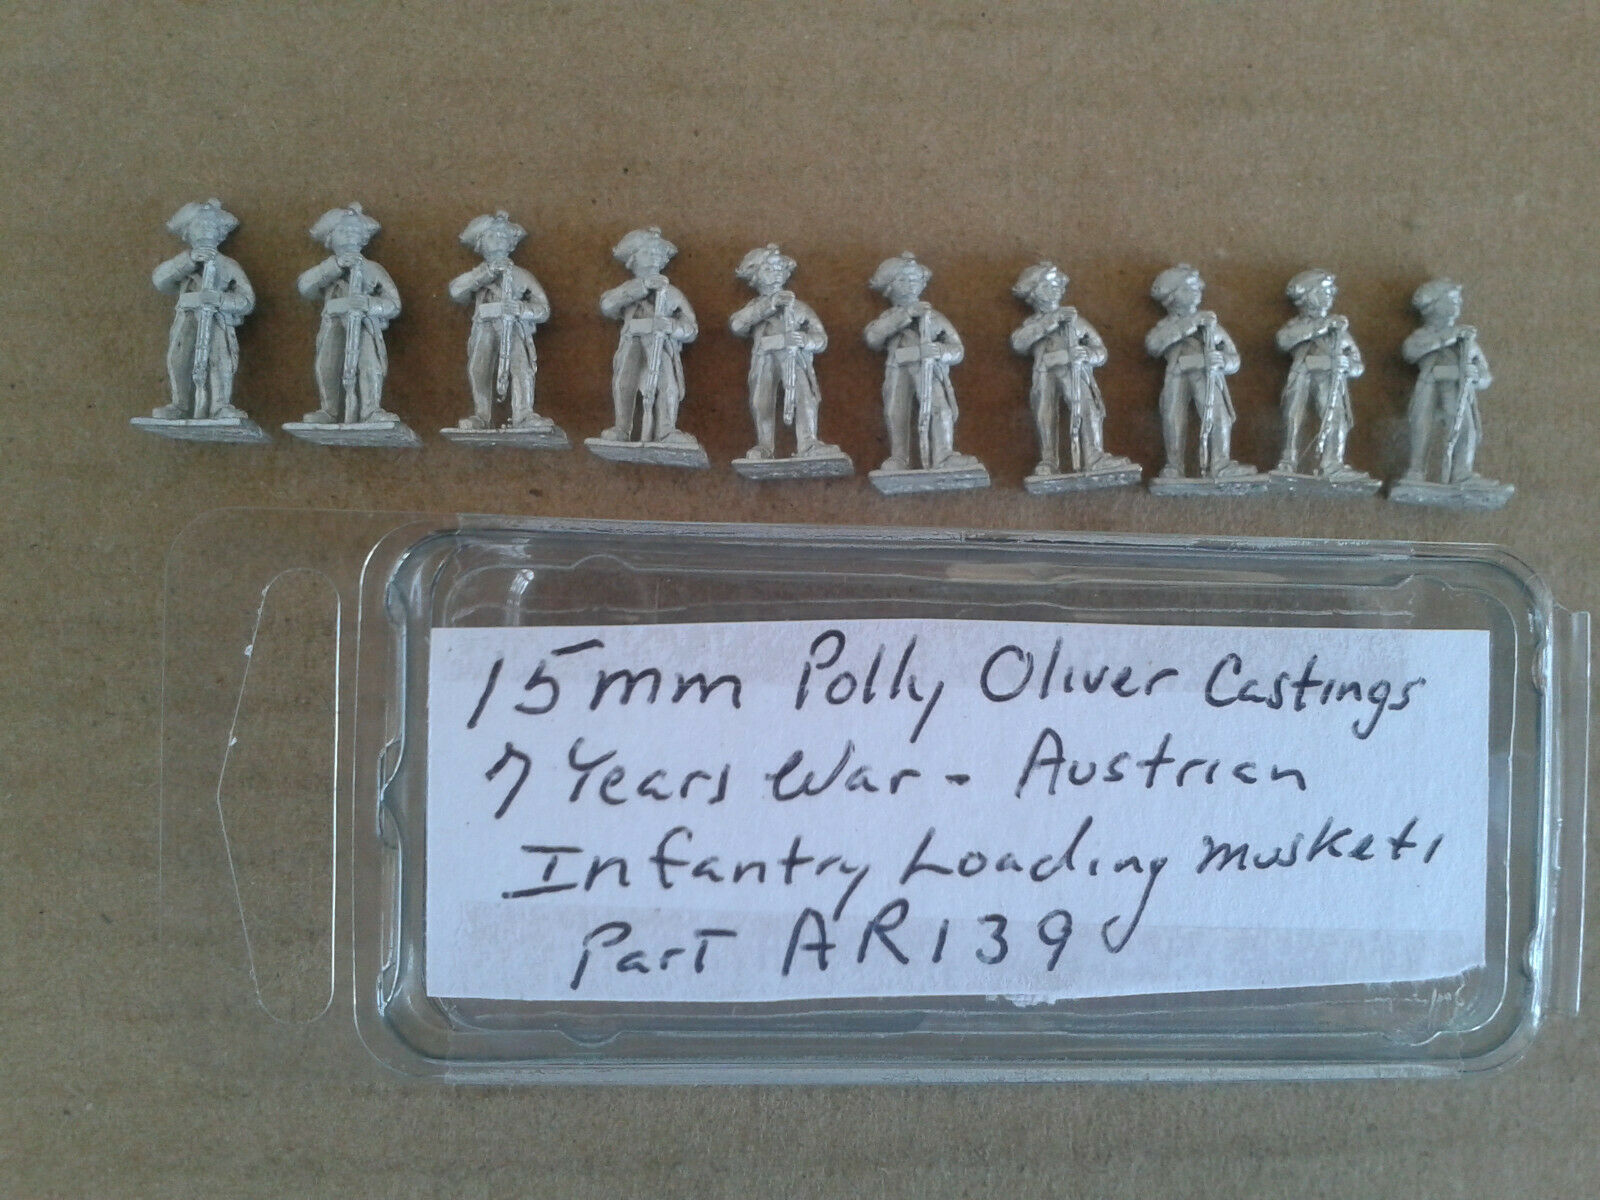 15mm Poly Oliver Castings 7 Years war Austrian Infantry Loading Muskets